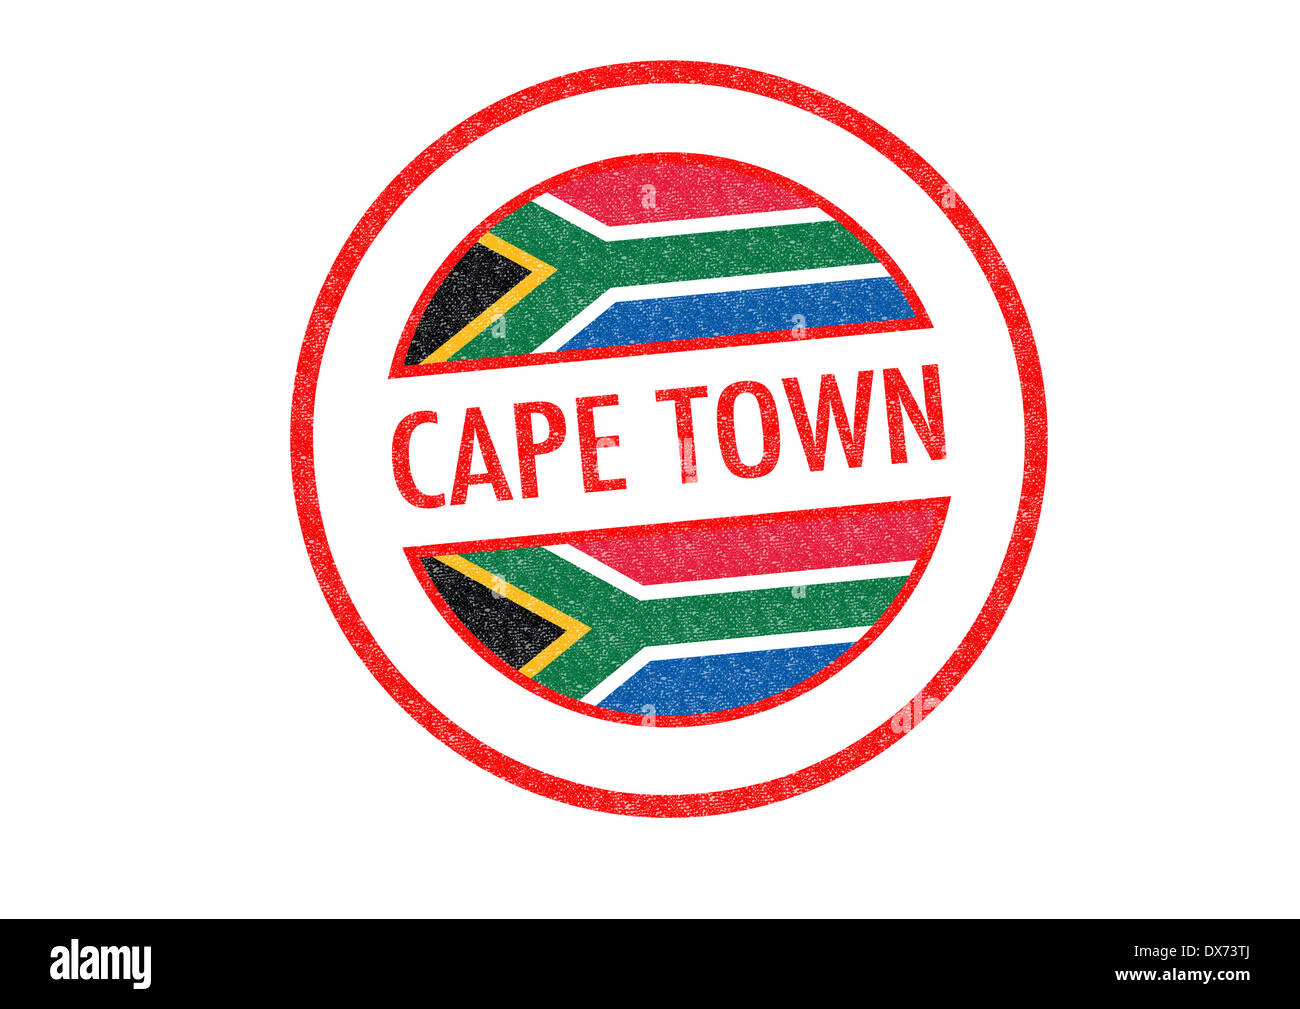 Passport-style CAPE TOWN (South Africa) rubber stamp over a white  background Stock Photo - Alamy